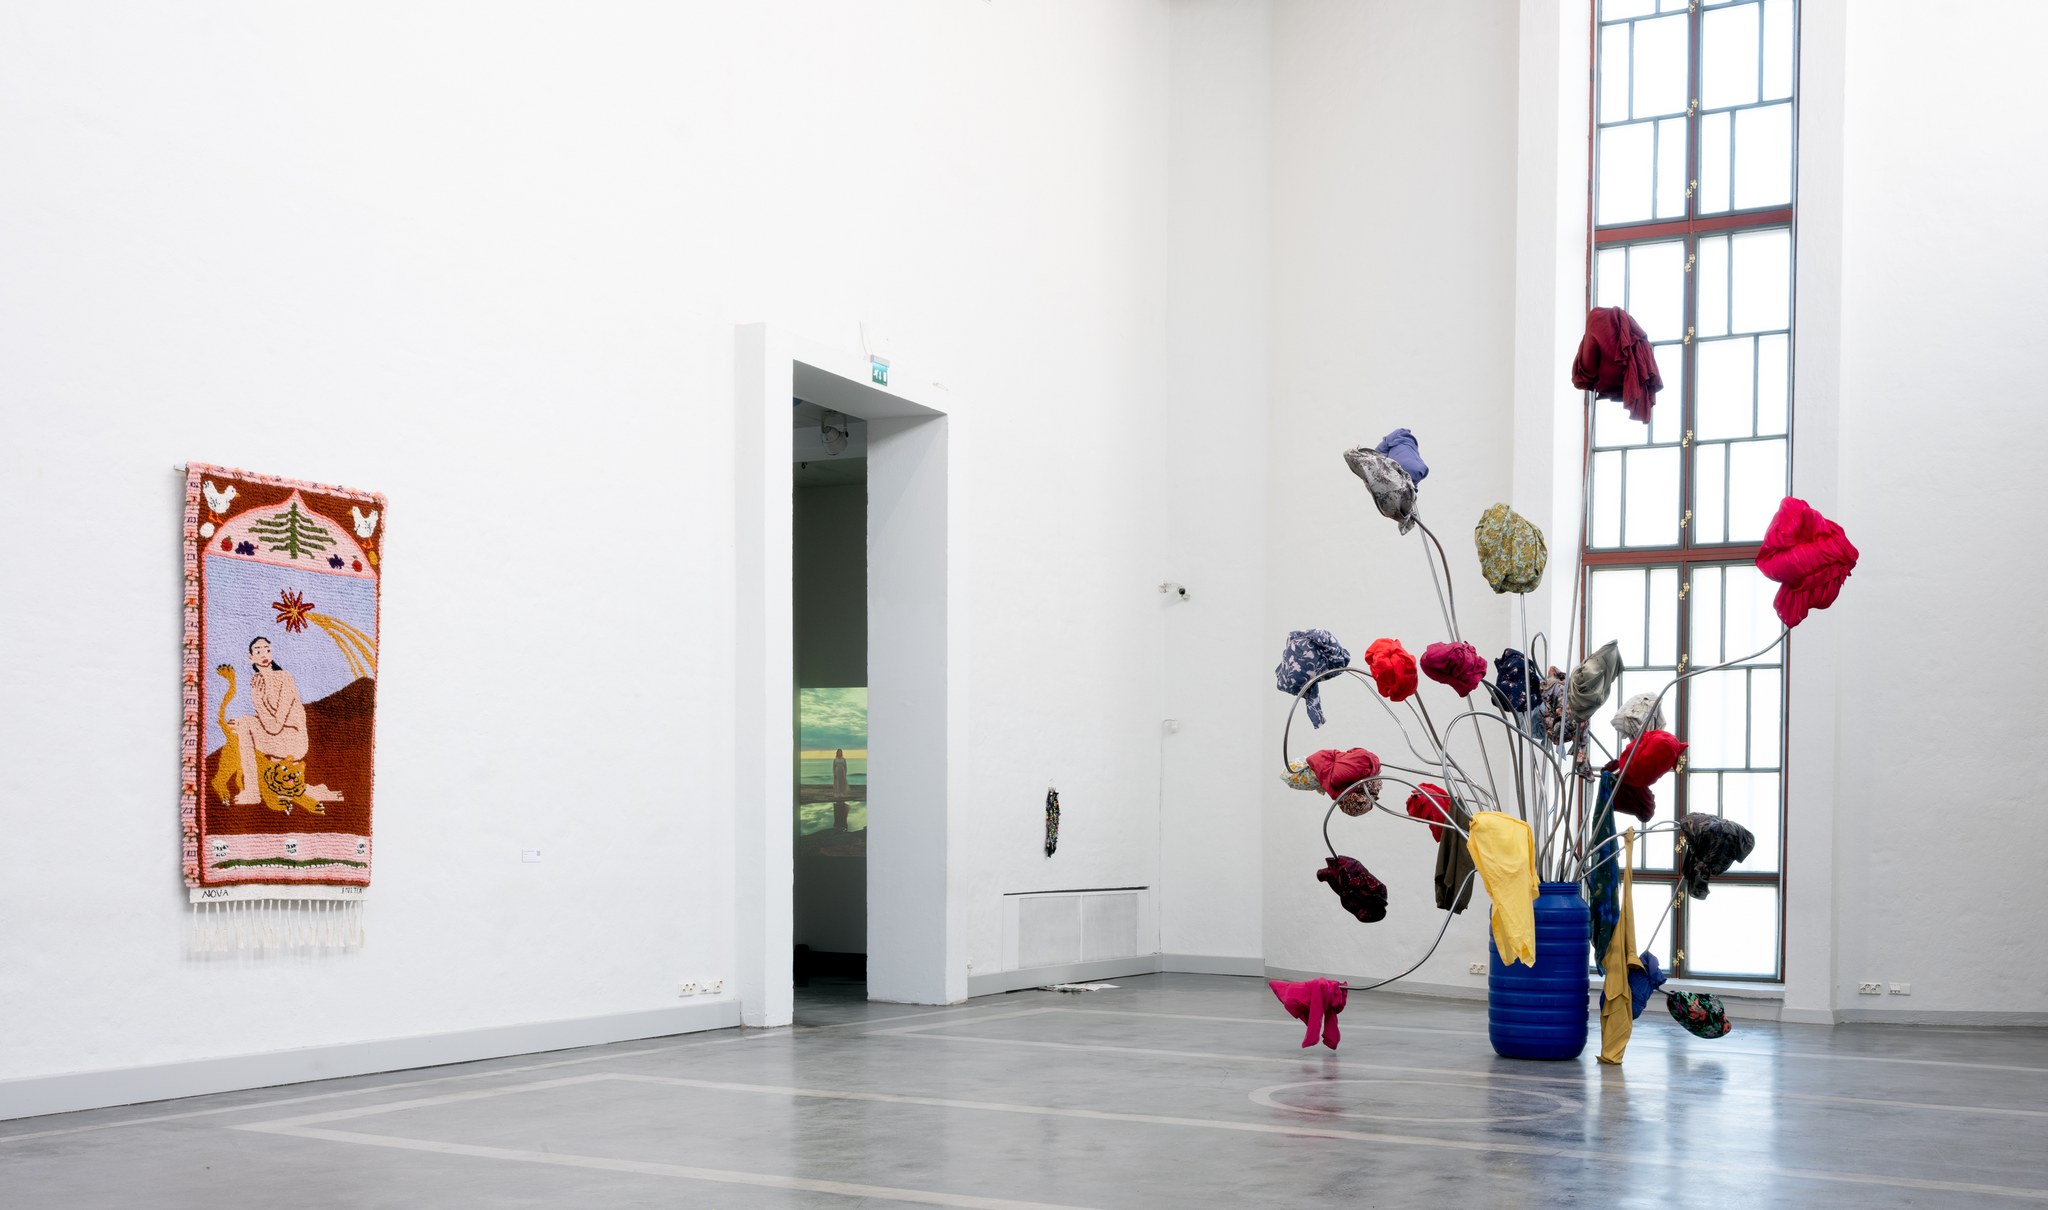 A tall exhibition space with a textile work on one of the walls and next to it a large sculpture resembling a flower pot with flowers growing out of it.